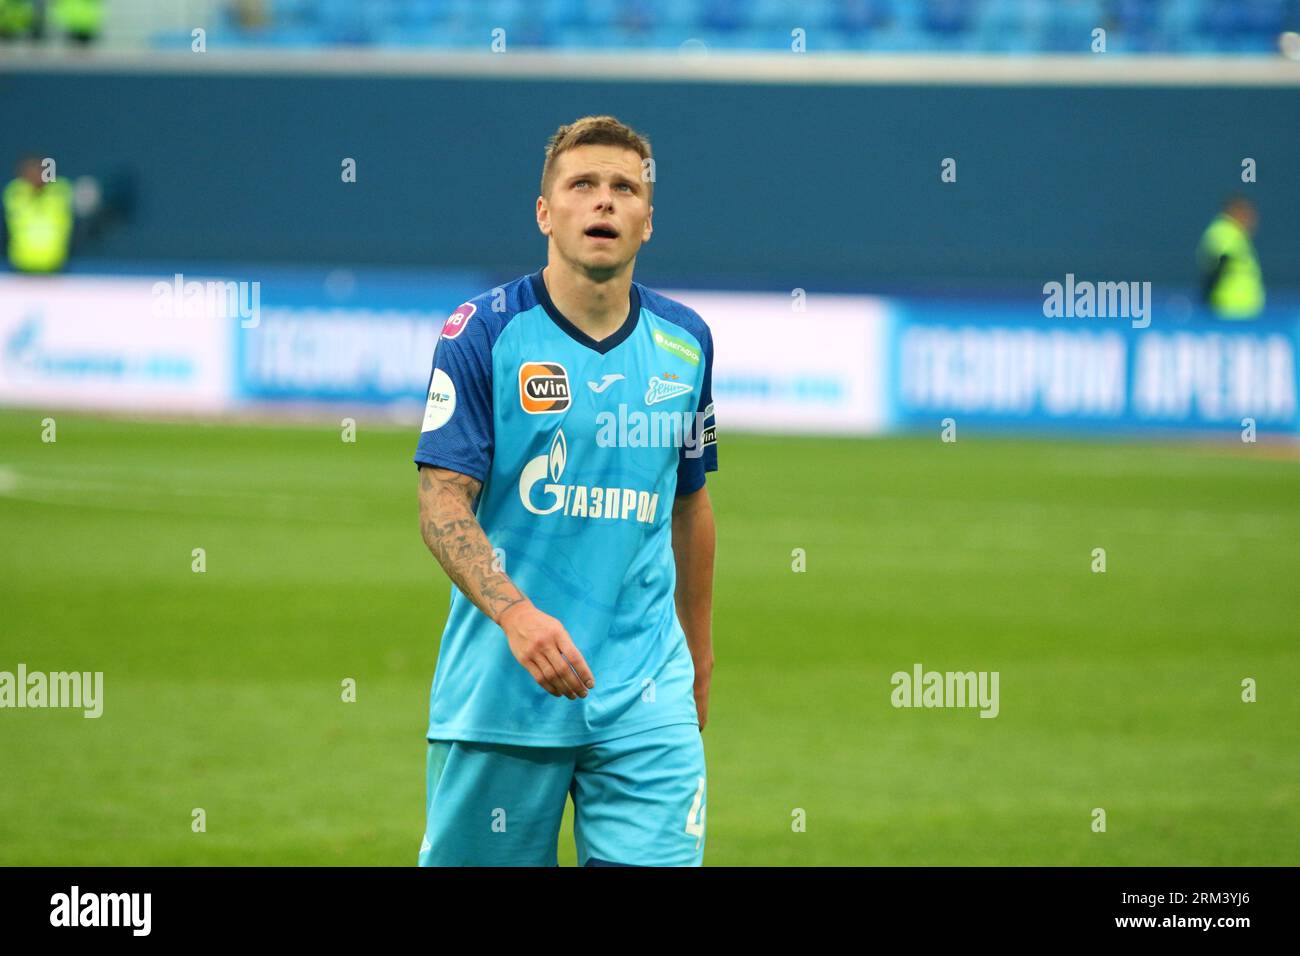 Saint Petersburg, Russia. 26th Aug, 2023. Danil Krugovoy (4) of Zenit seen during the Russian Premier League football match between Zenit Saint Petersburg and Ural Yekaterinburg at Gazprom Arena. Final score; Zenit 4:0 Ural. Credit: SOPA Images Limited/Alamy Live News Foto Stock